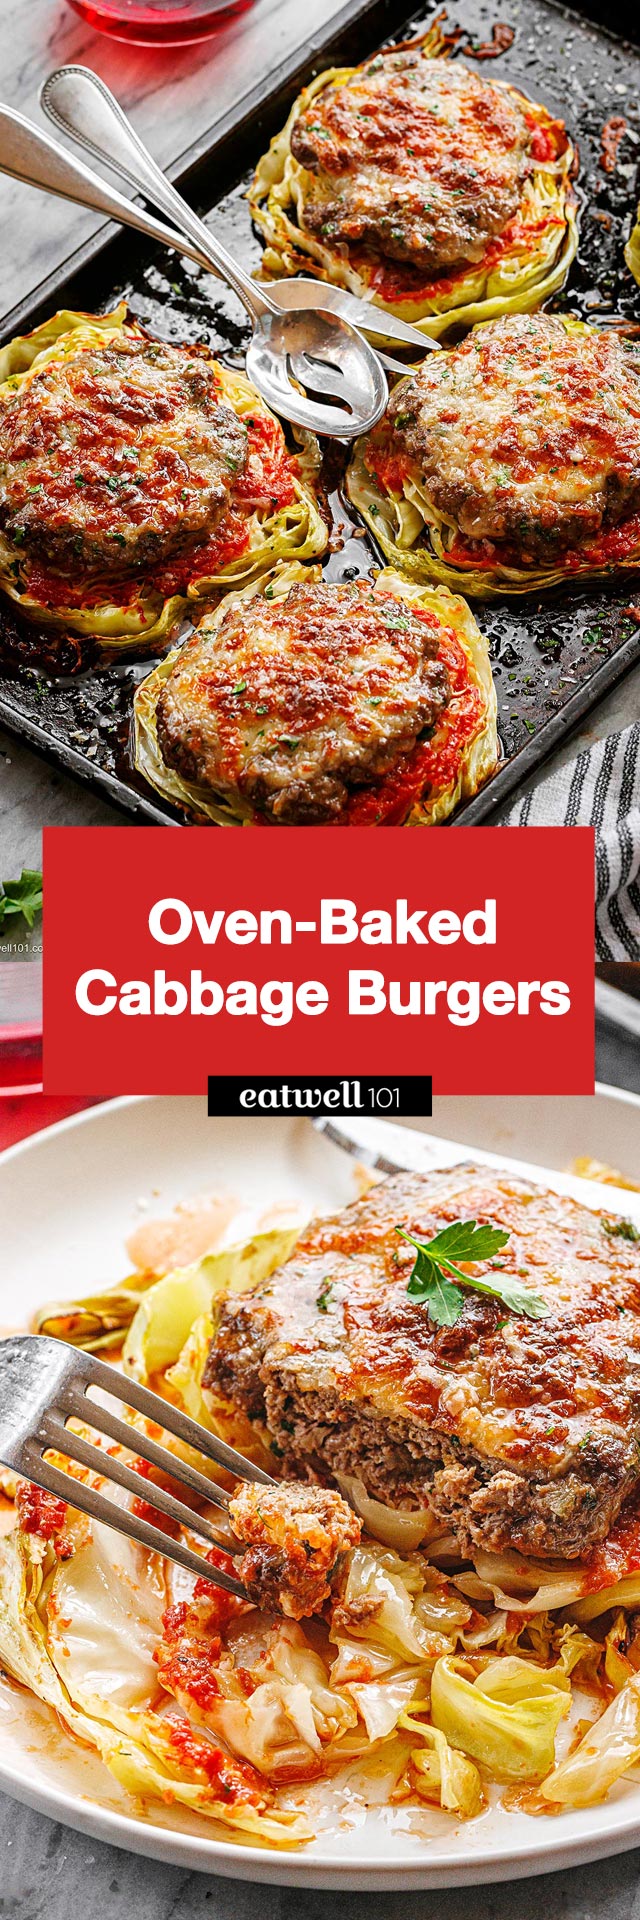 Oven-Baked Cabbage Burgers - #cabbage #burger #recipe #eatwell101 - This roasted cabbage burger recipe is sure to bring a whole new flavor to your dinner table! The burgers are easy to make and sure to be a hit with the whole family!